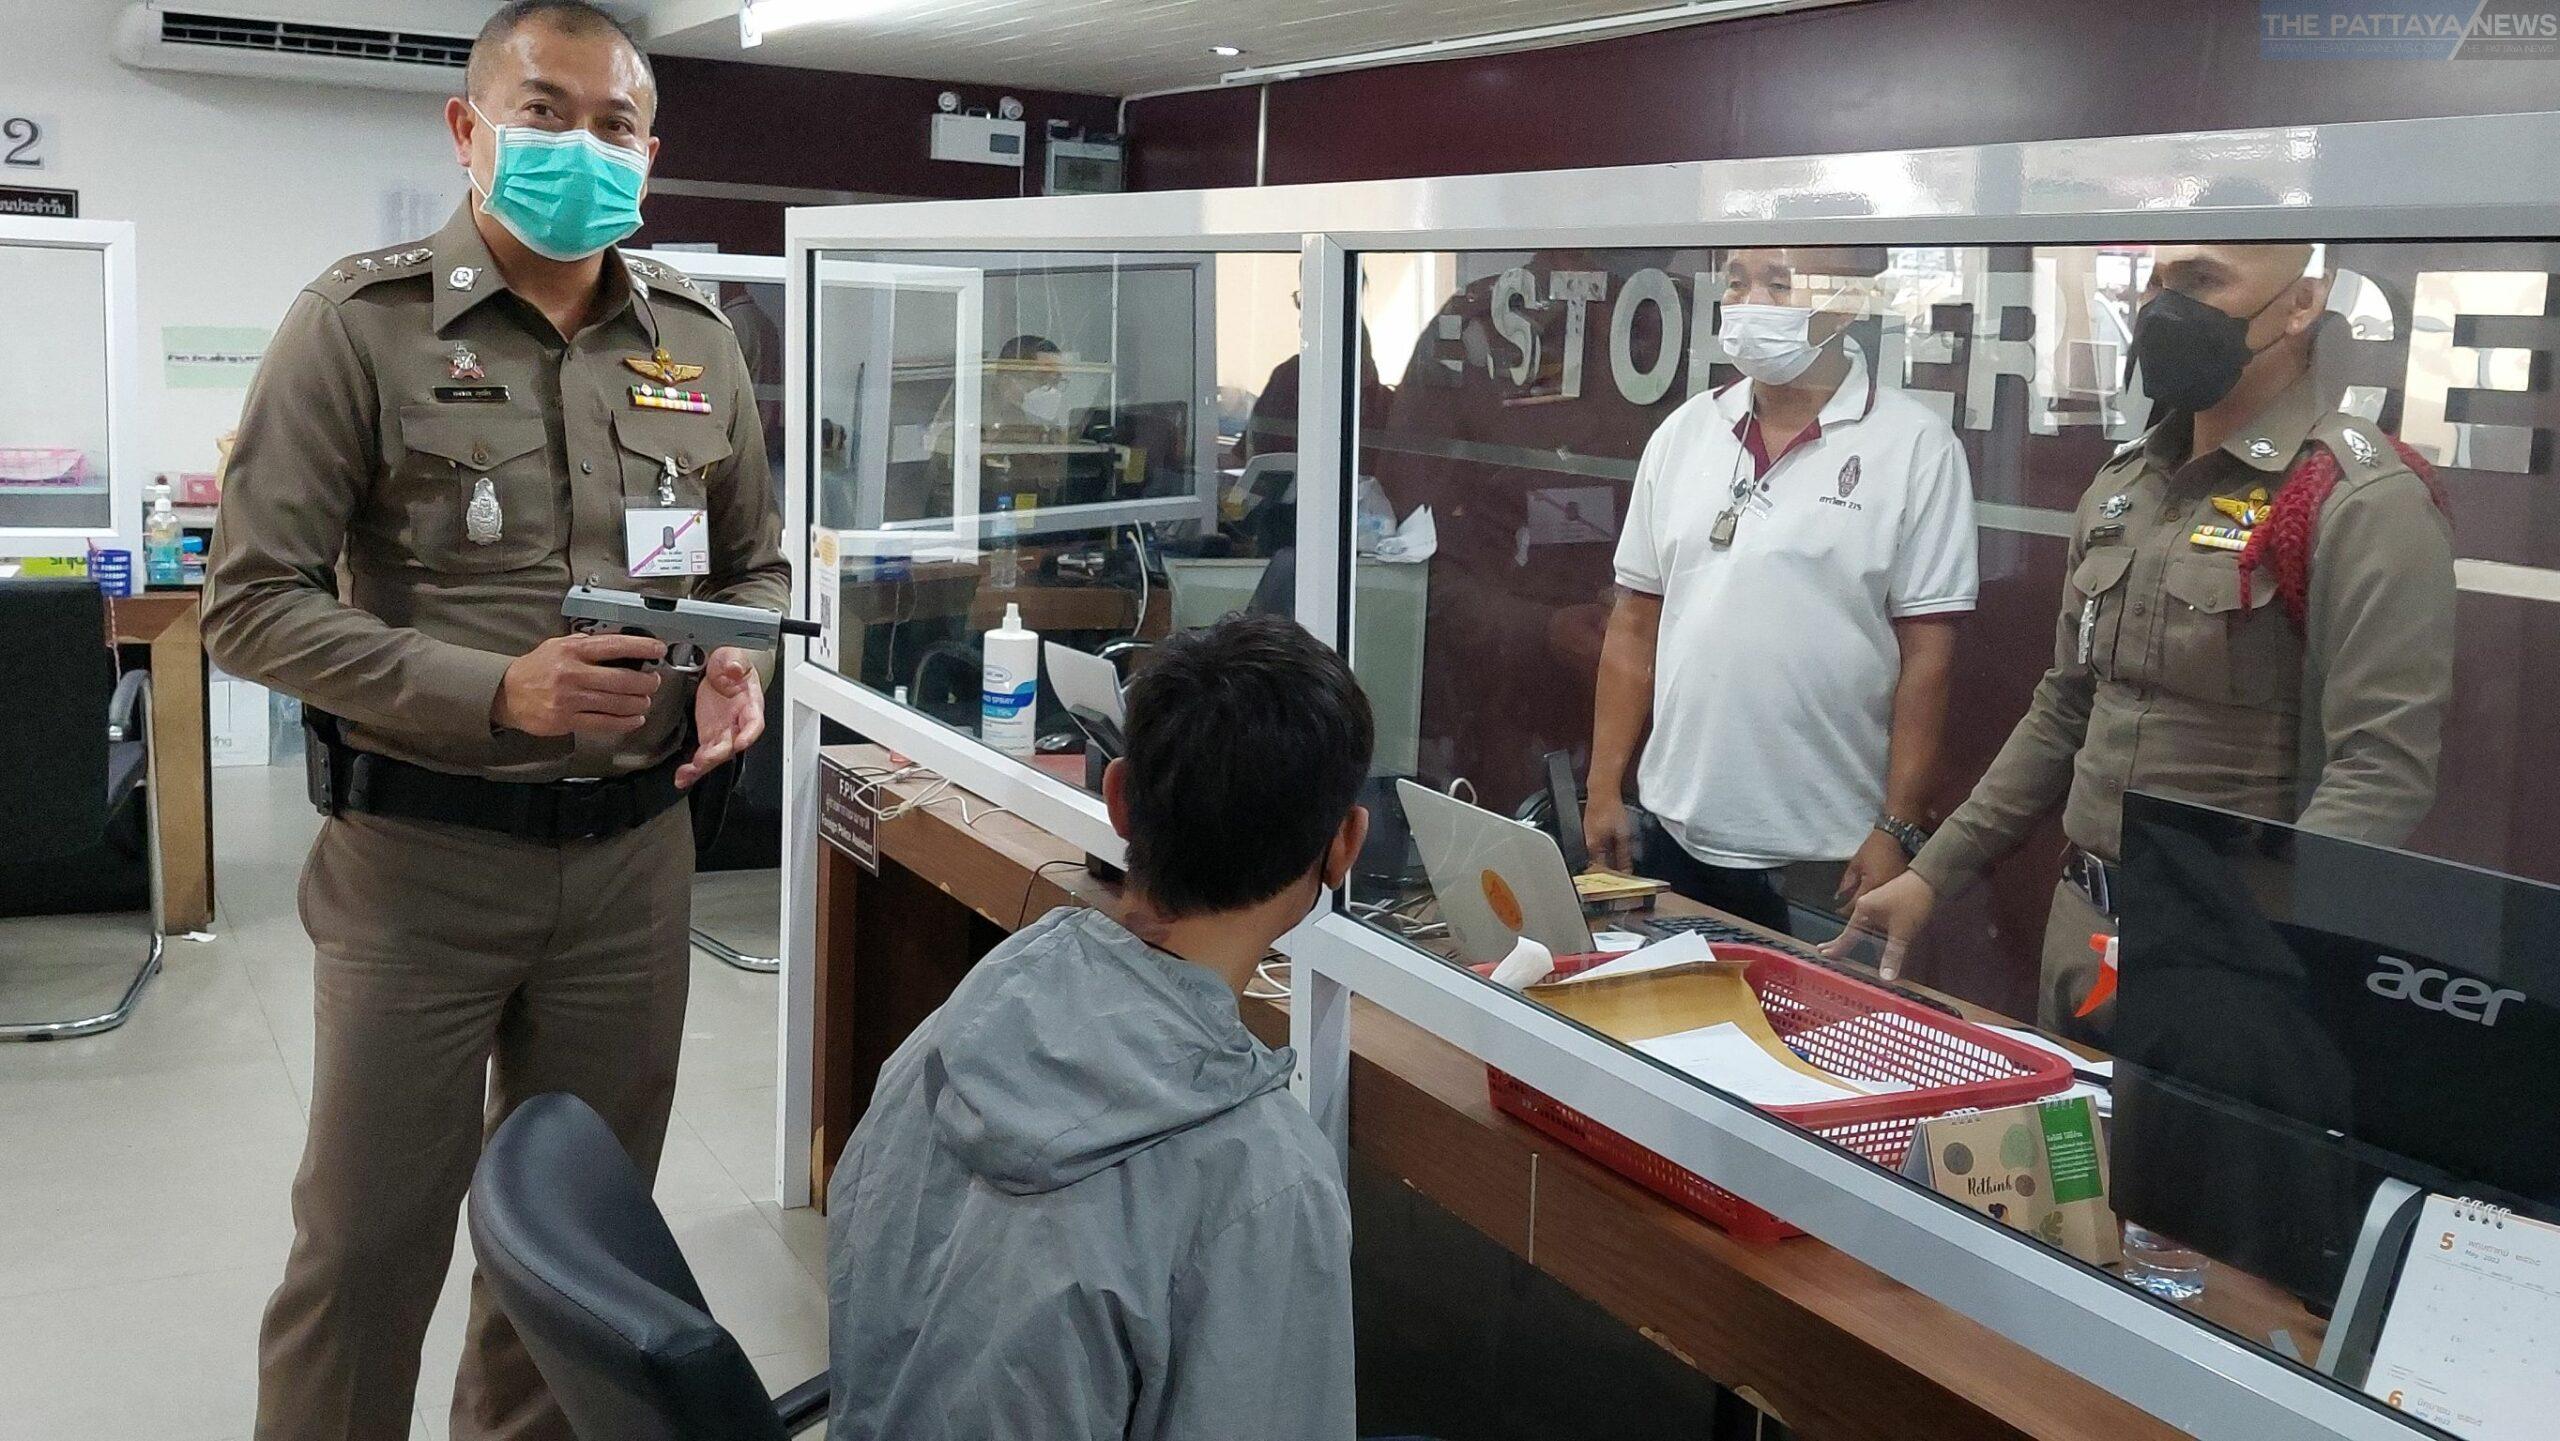 UPDATE: Ex-boyfriend who threatened 18-year-old girl with firearm surrenders at Pattaya Police Station, says weapon was a toy BB gun